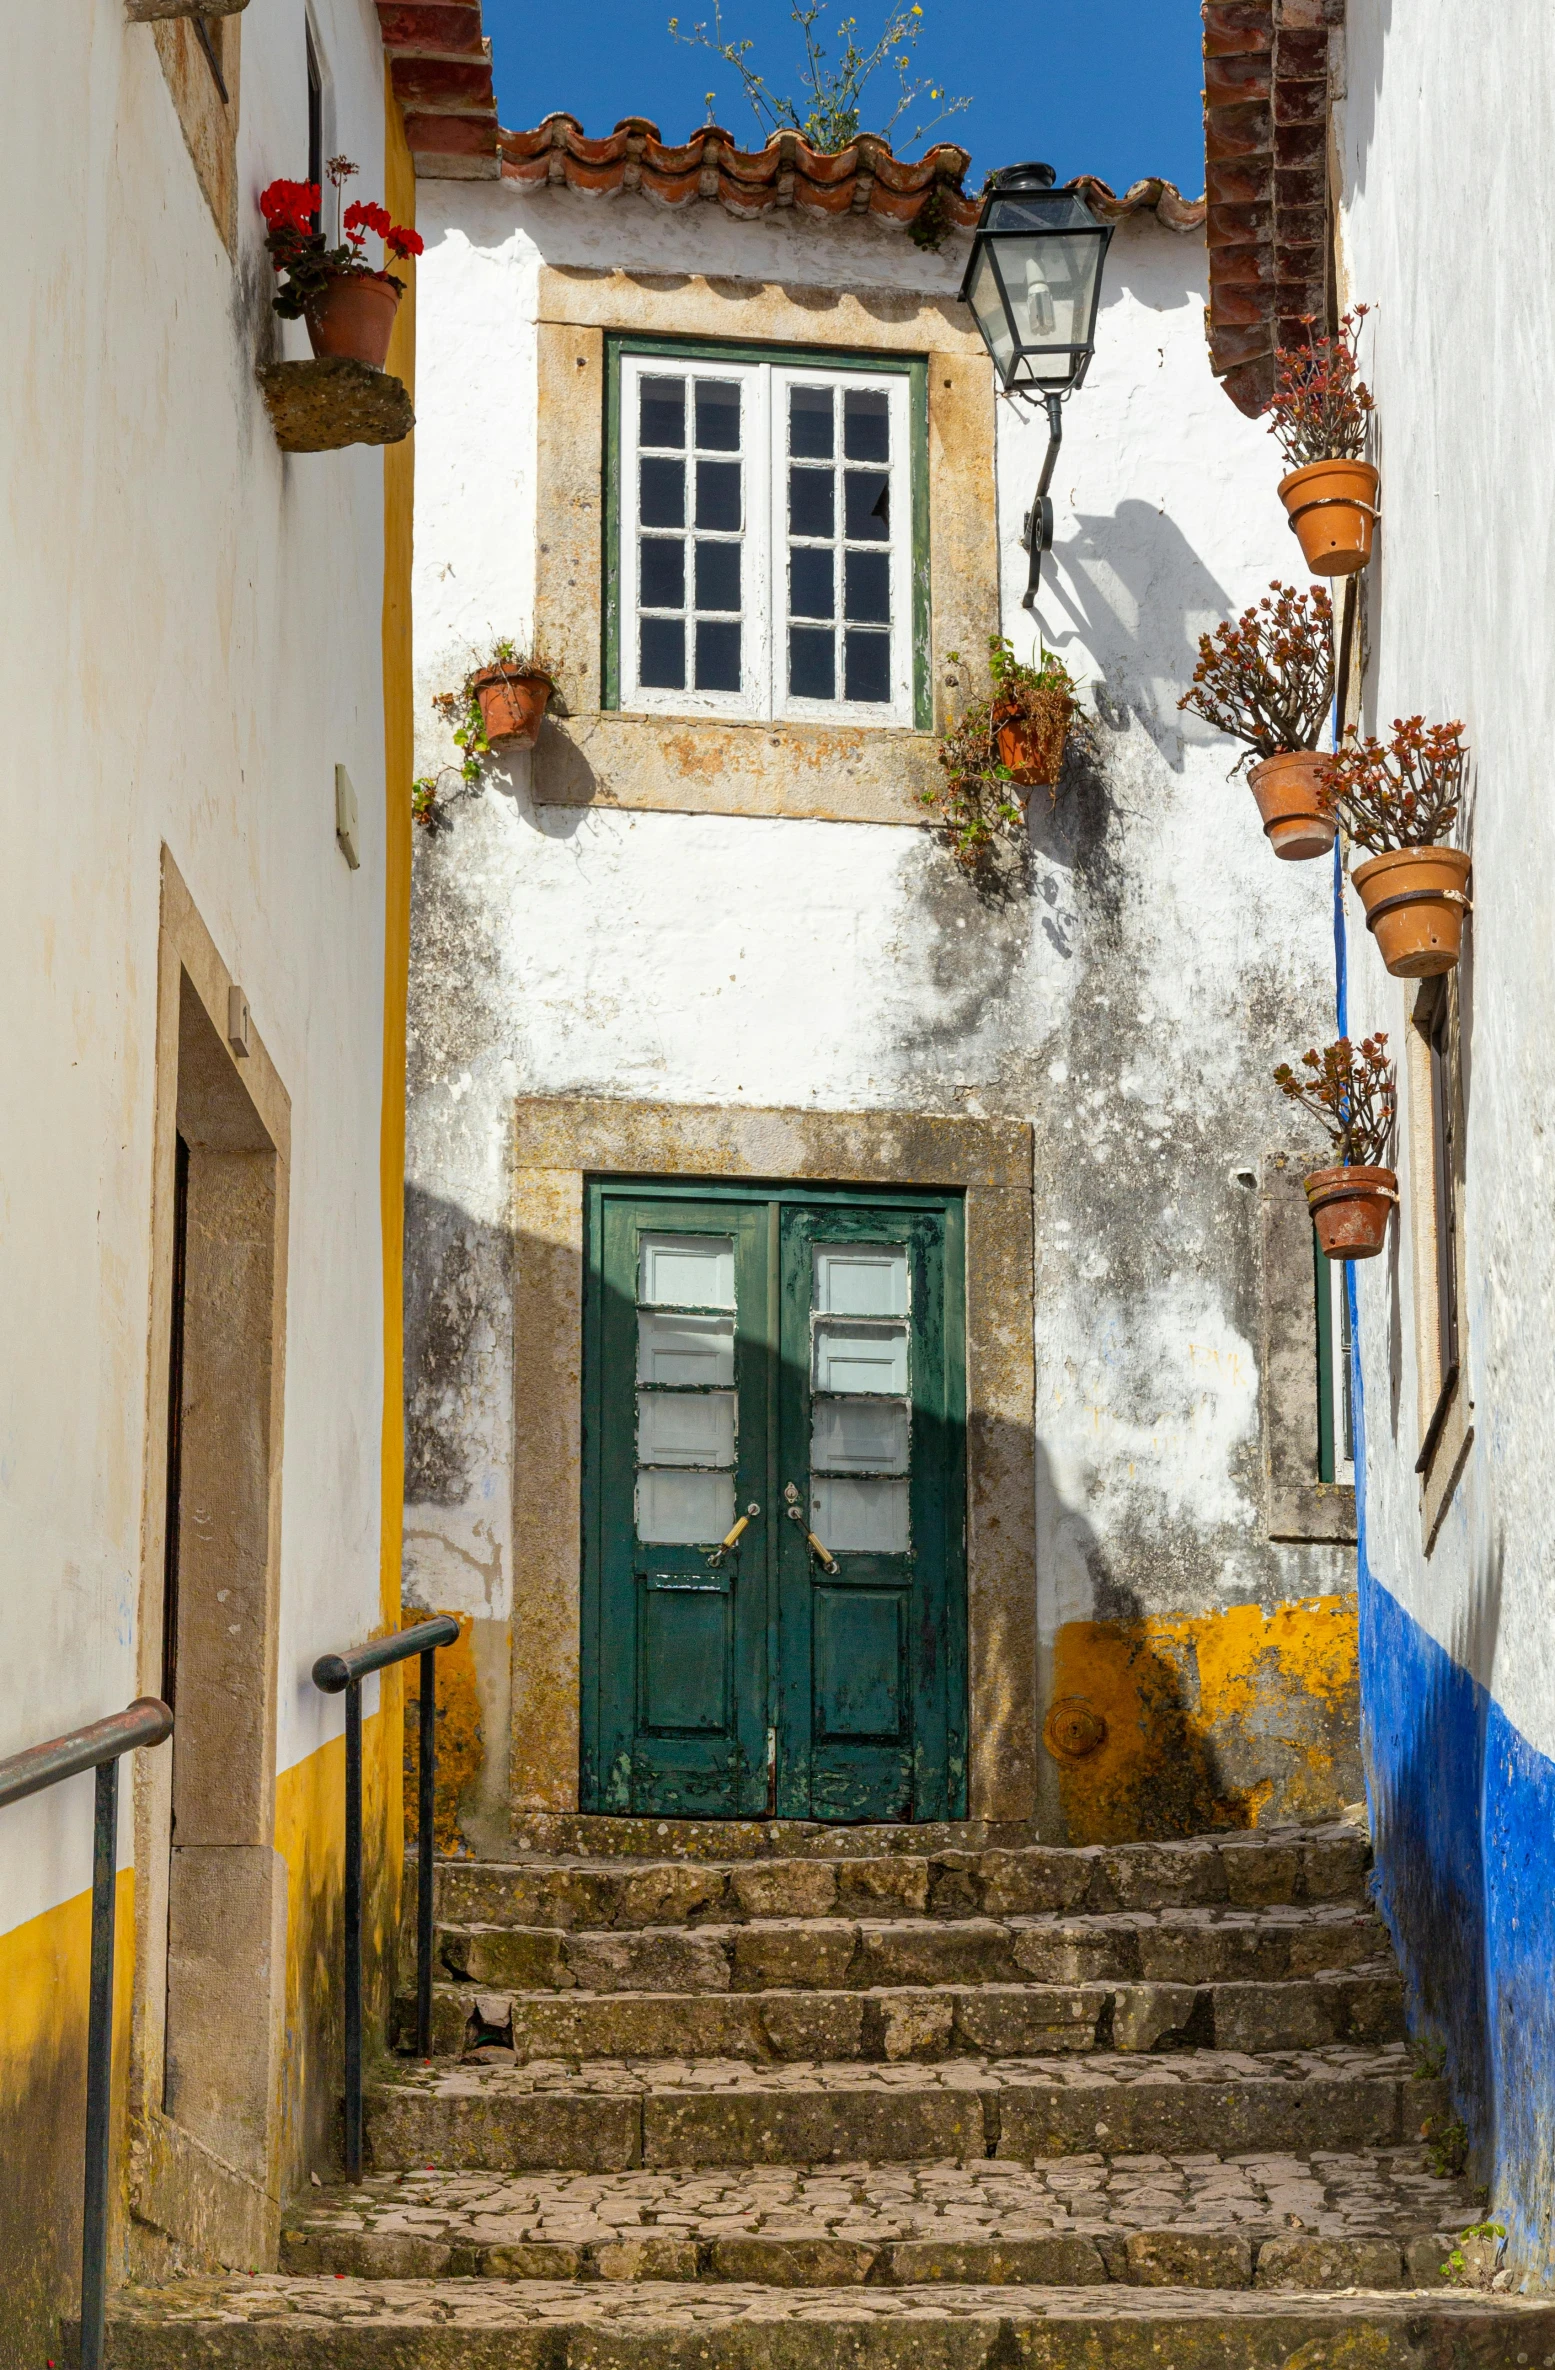 stairs lead down to an entrance door in a colorful town